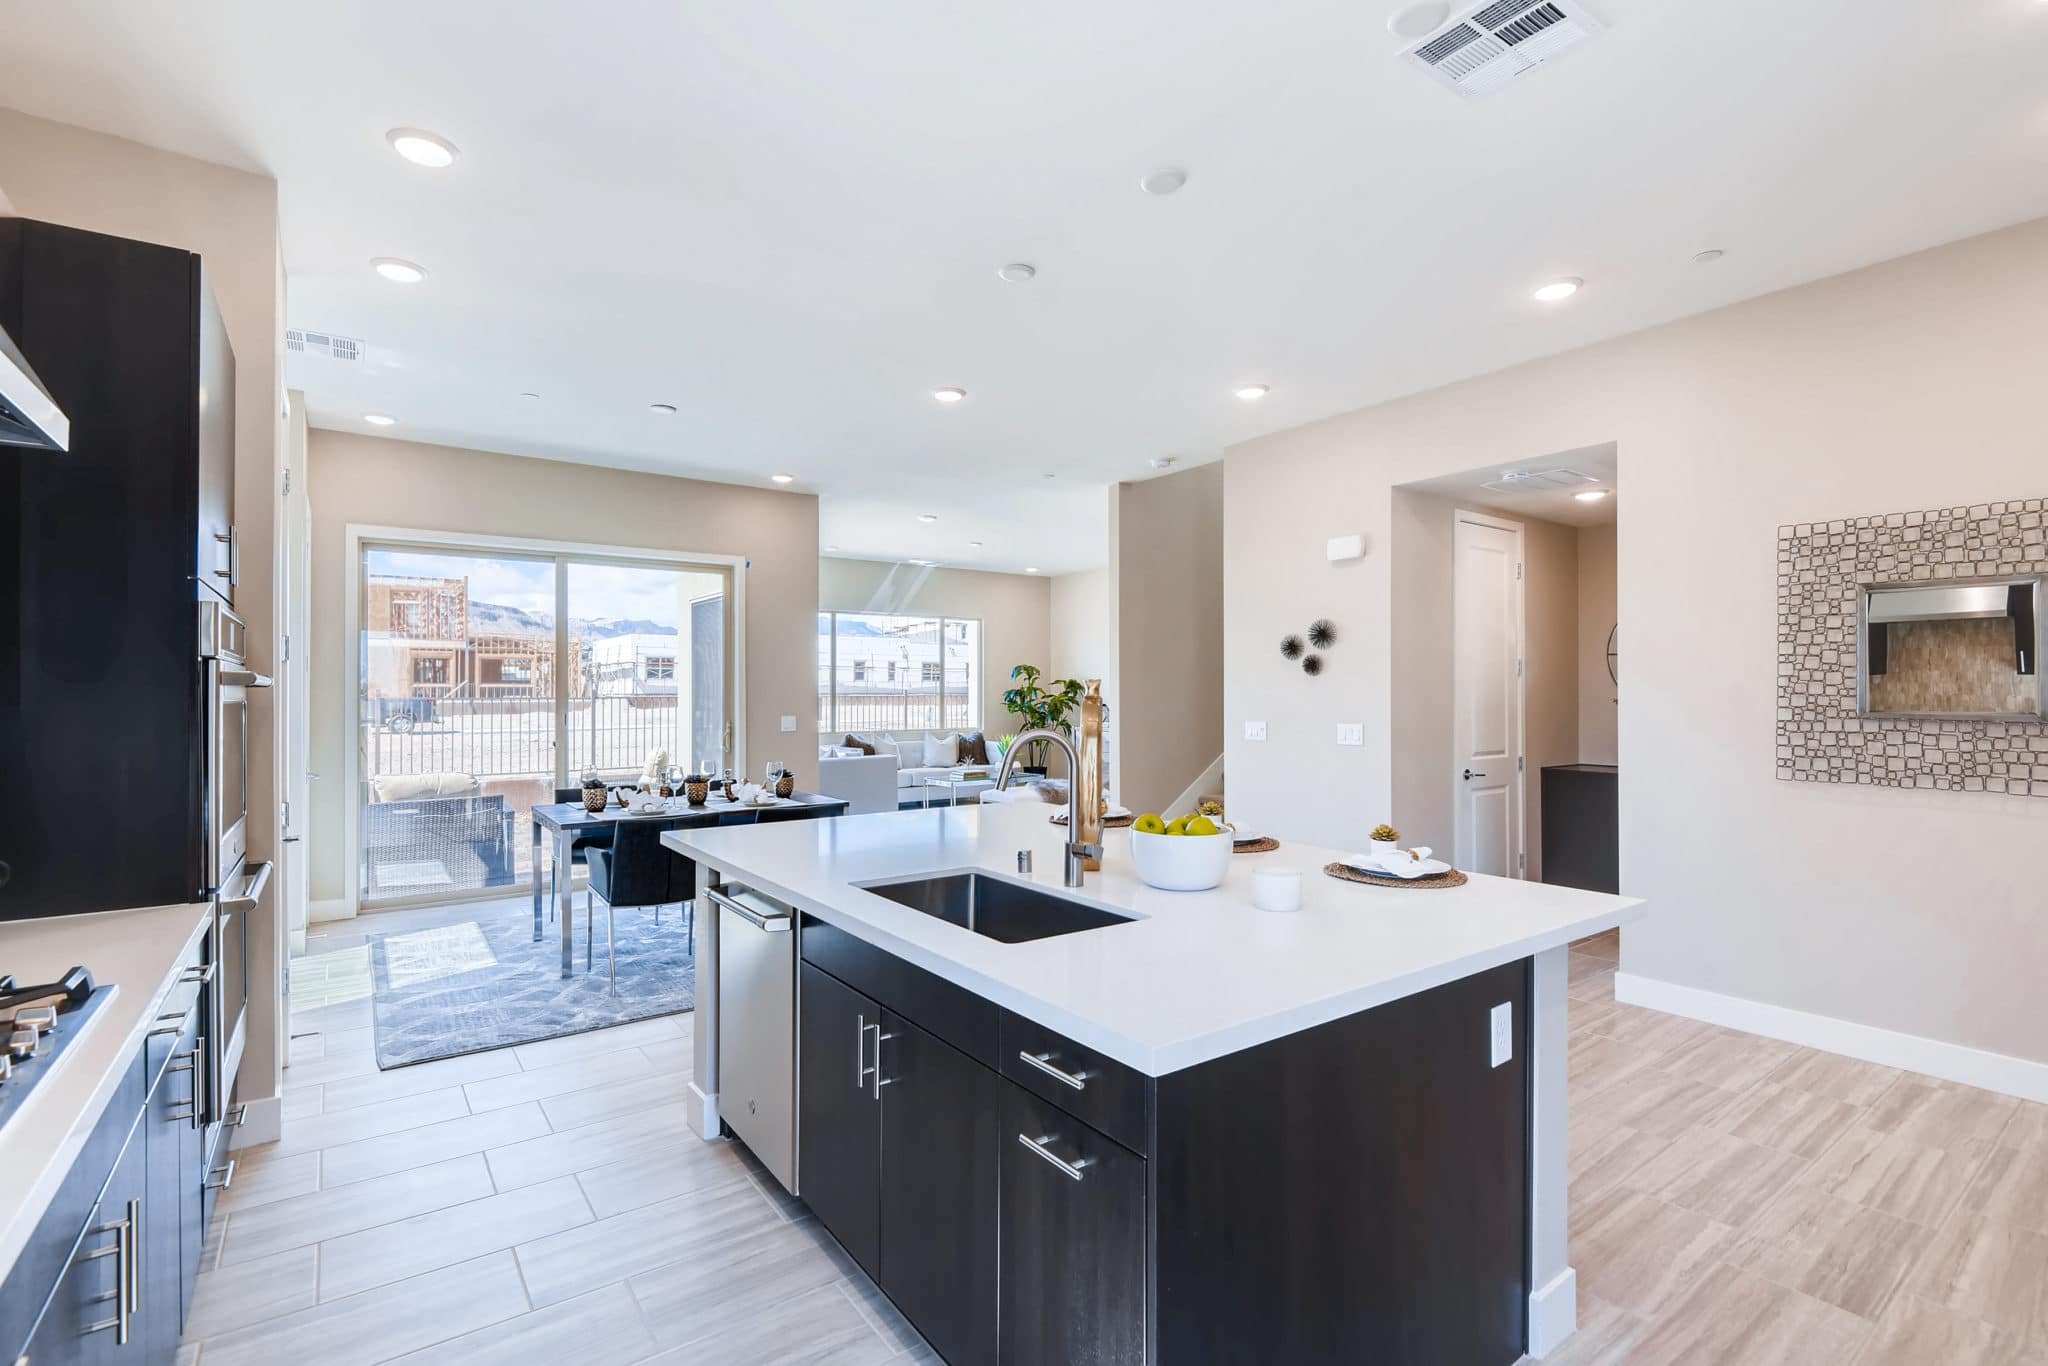 Kitchen in Luminous in Luxe Collection in Trilogy by Shea Homes in South Square in Summerlin